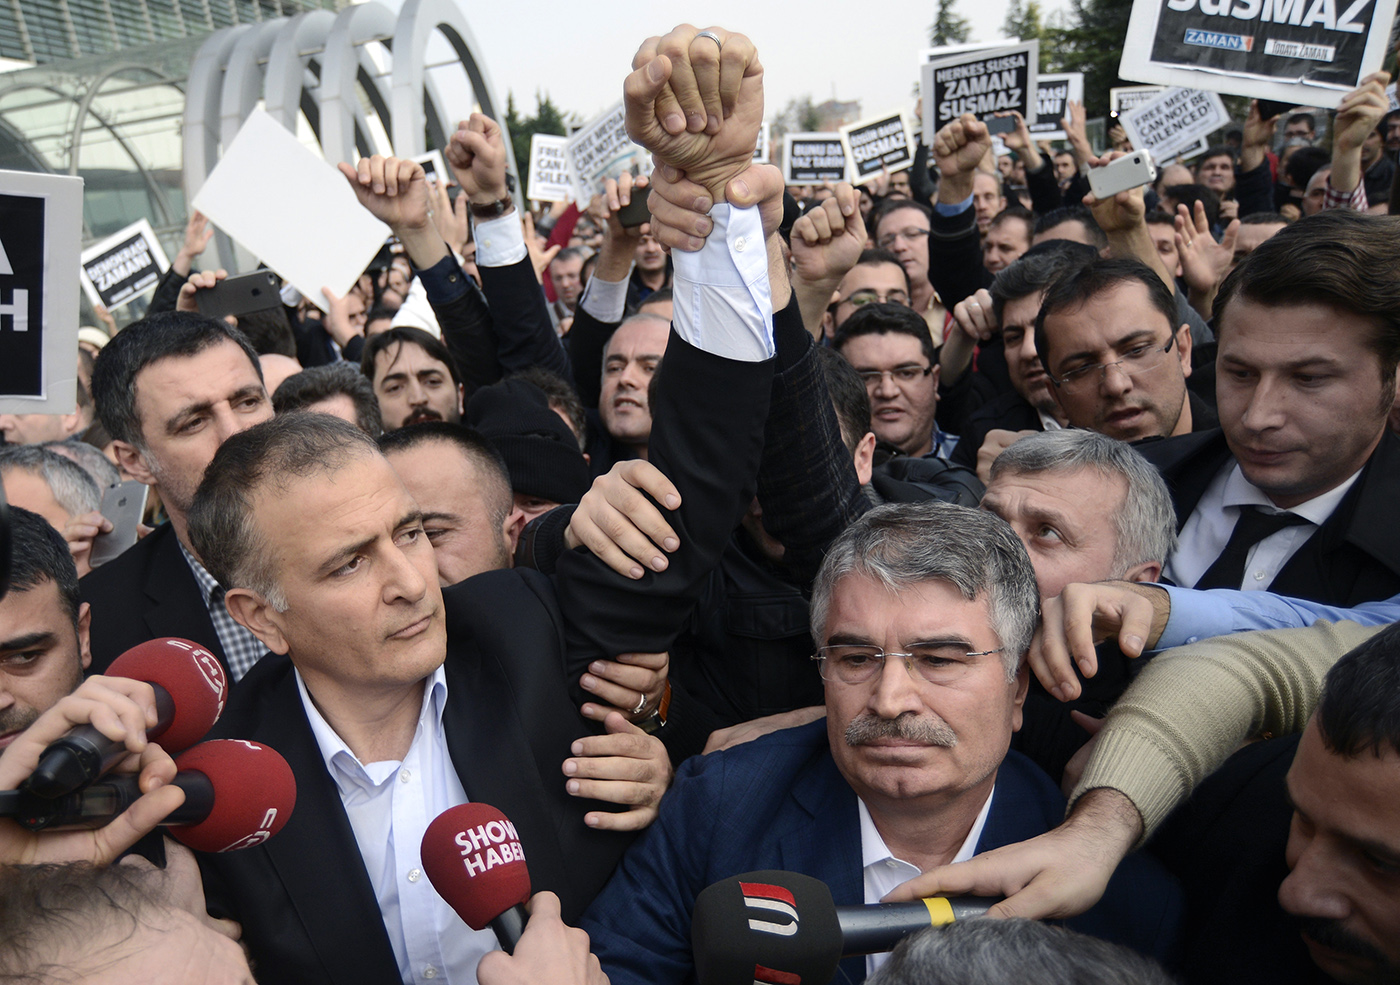 Turkish plain-clothed police officers detain Ekrem Dumanli (L) chief editor of Zaman newspapers, as supporters of Fethullah Gulen Movement surround of him as a part of a Turkish police operation targeting the media close to the Fethullah Gülen, in Istanbul, Turkey, 14 December 2014.